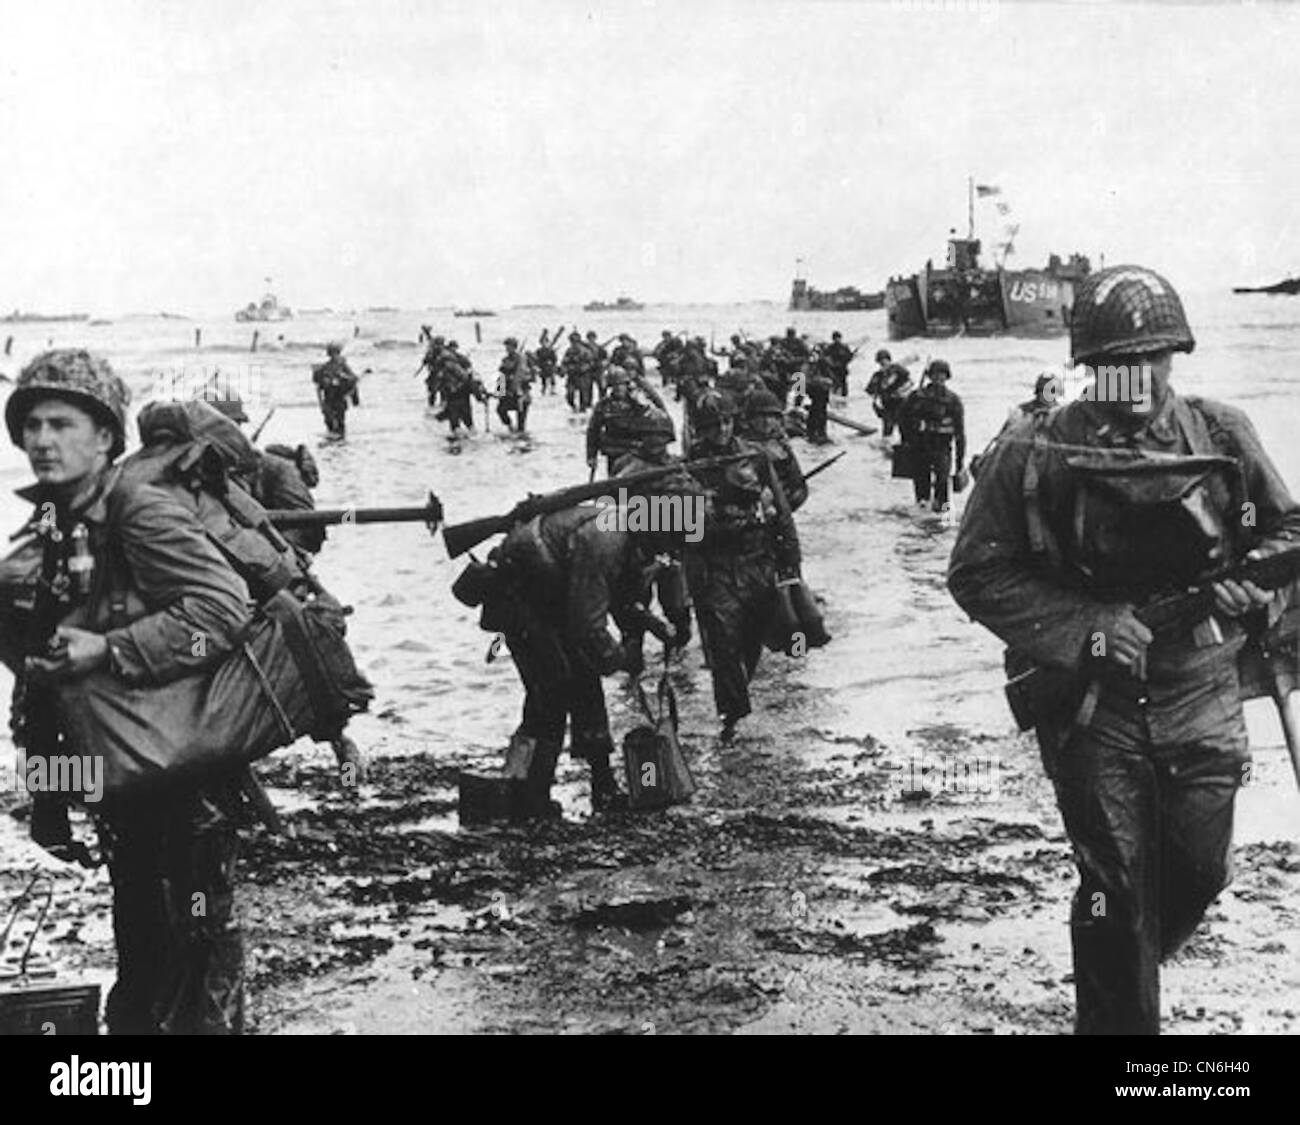 Normandy World War Two 6th june 1944 Stock Photo